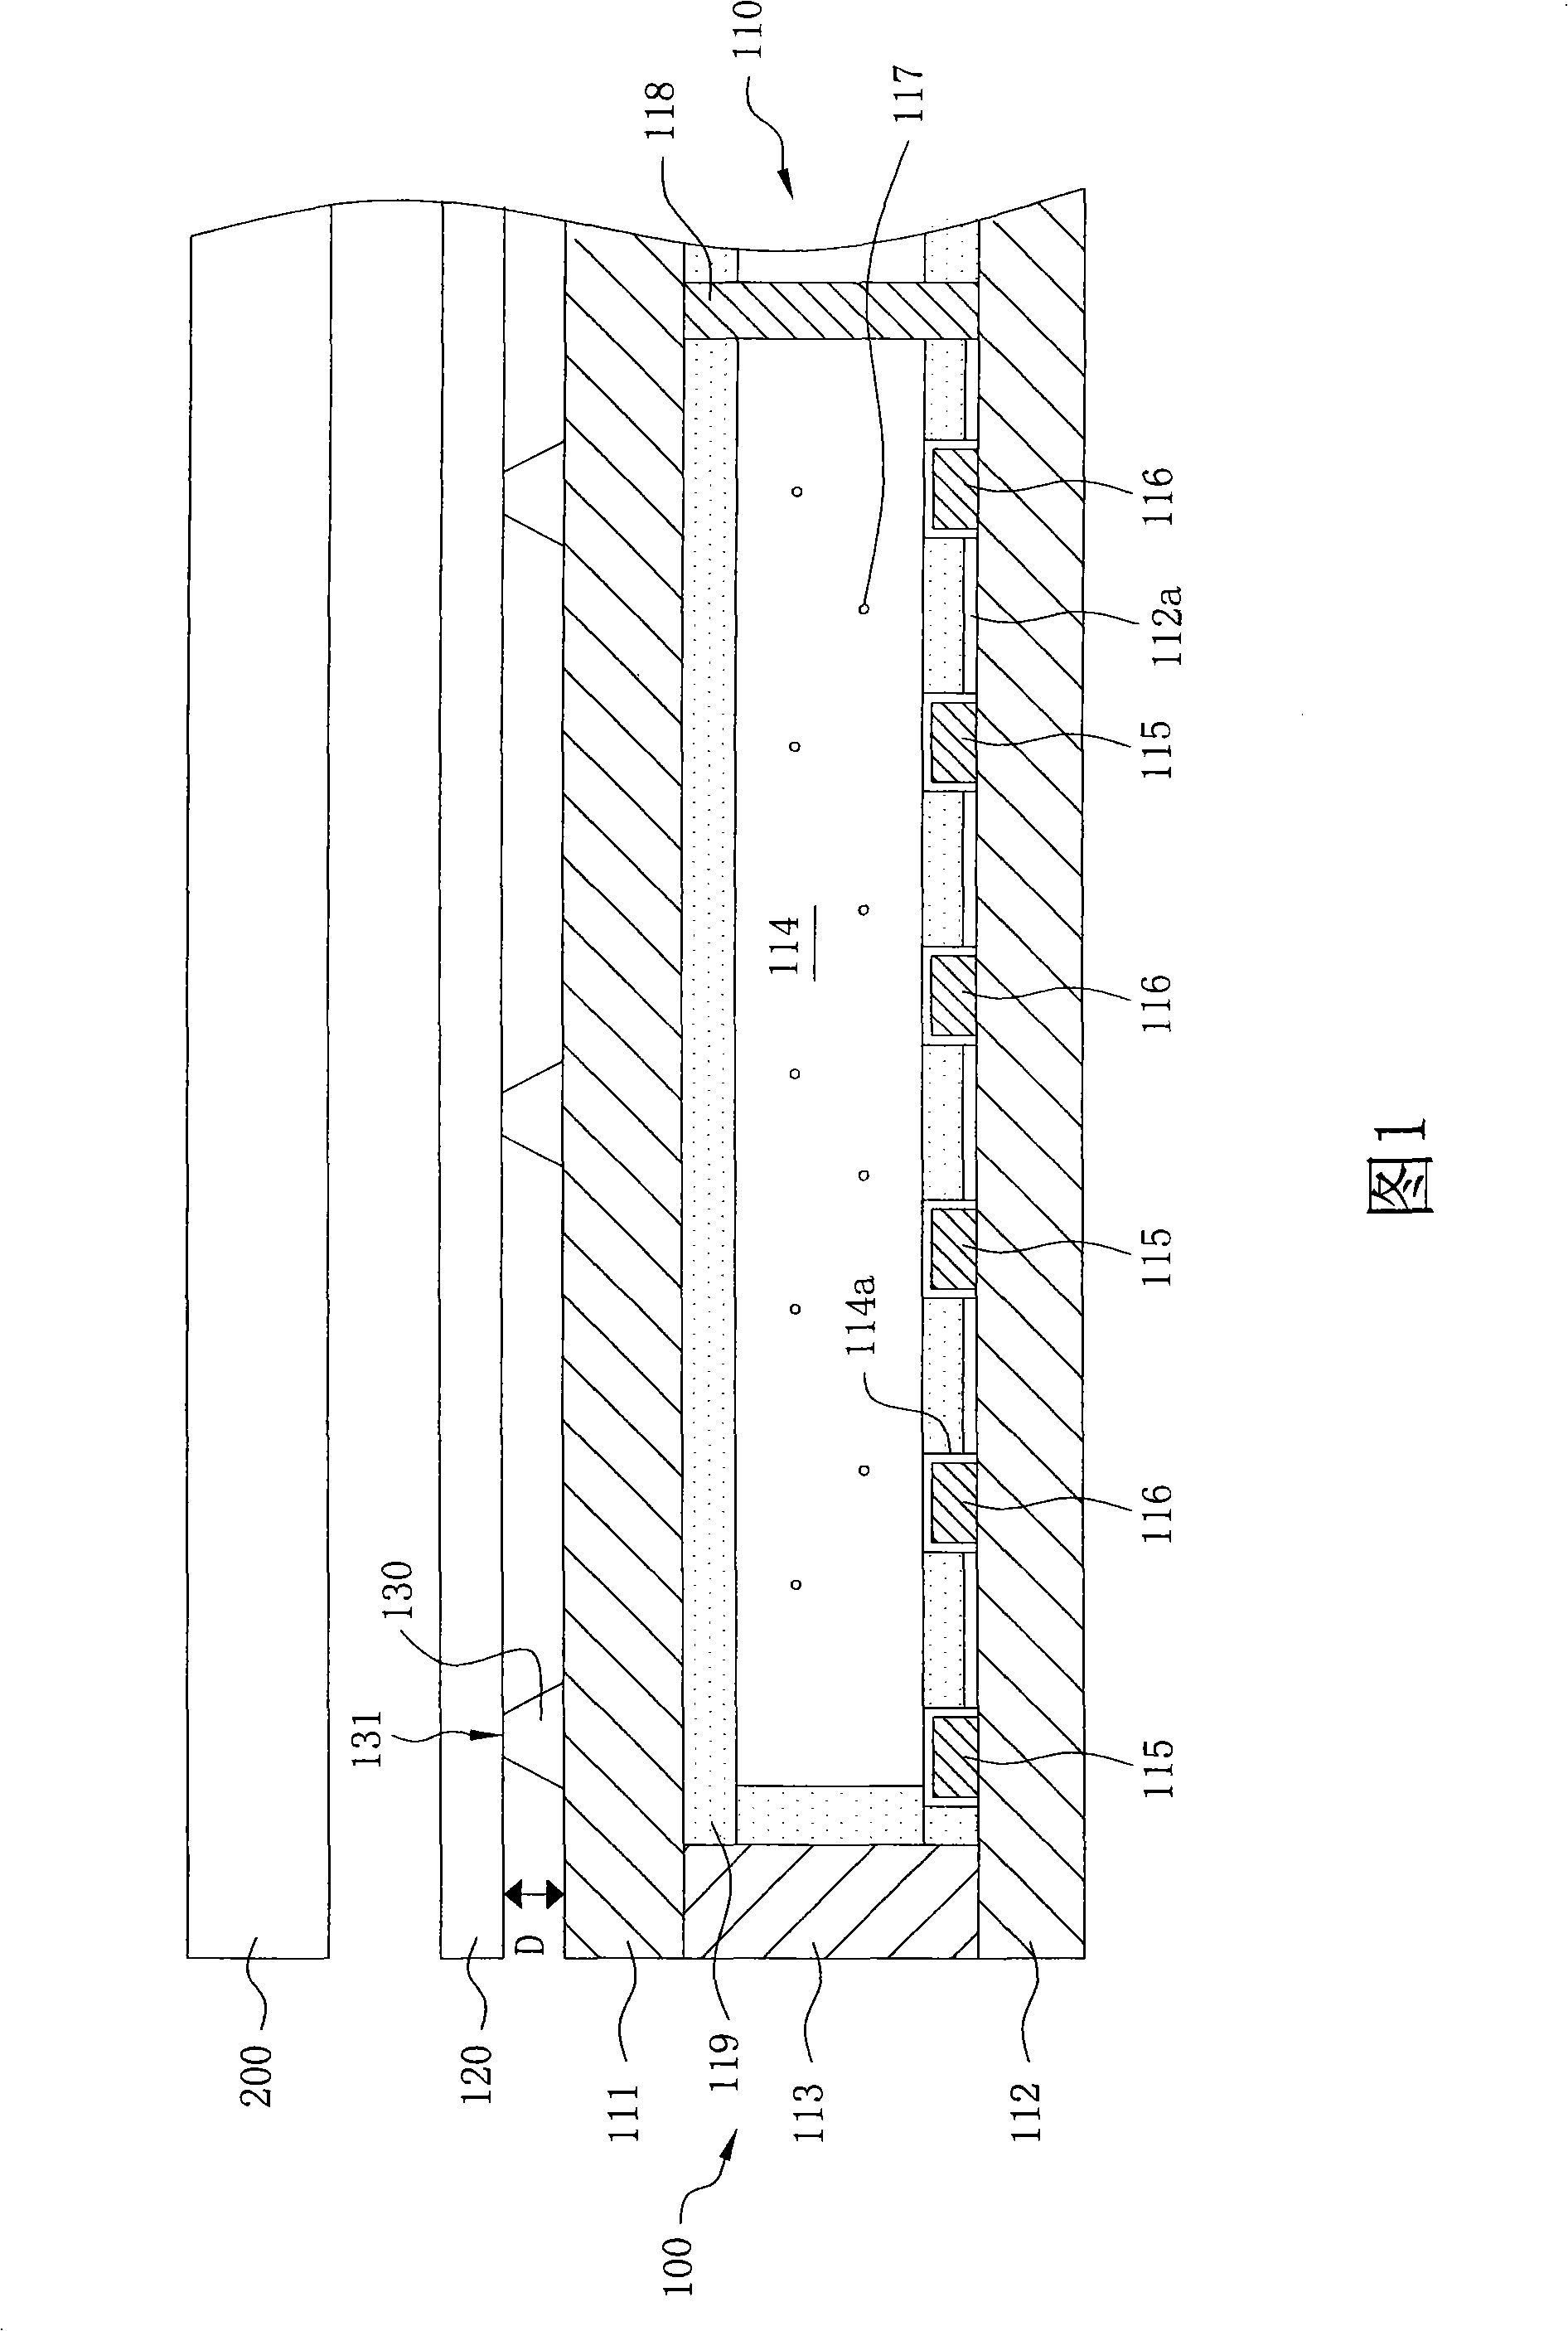 Backlight module and uses thereof